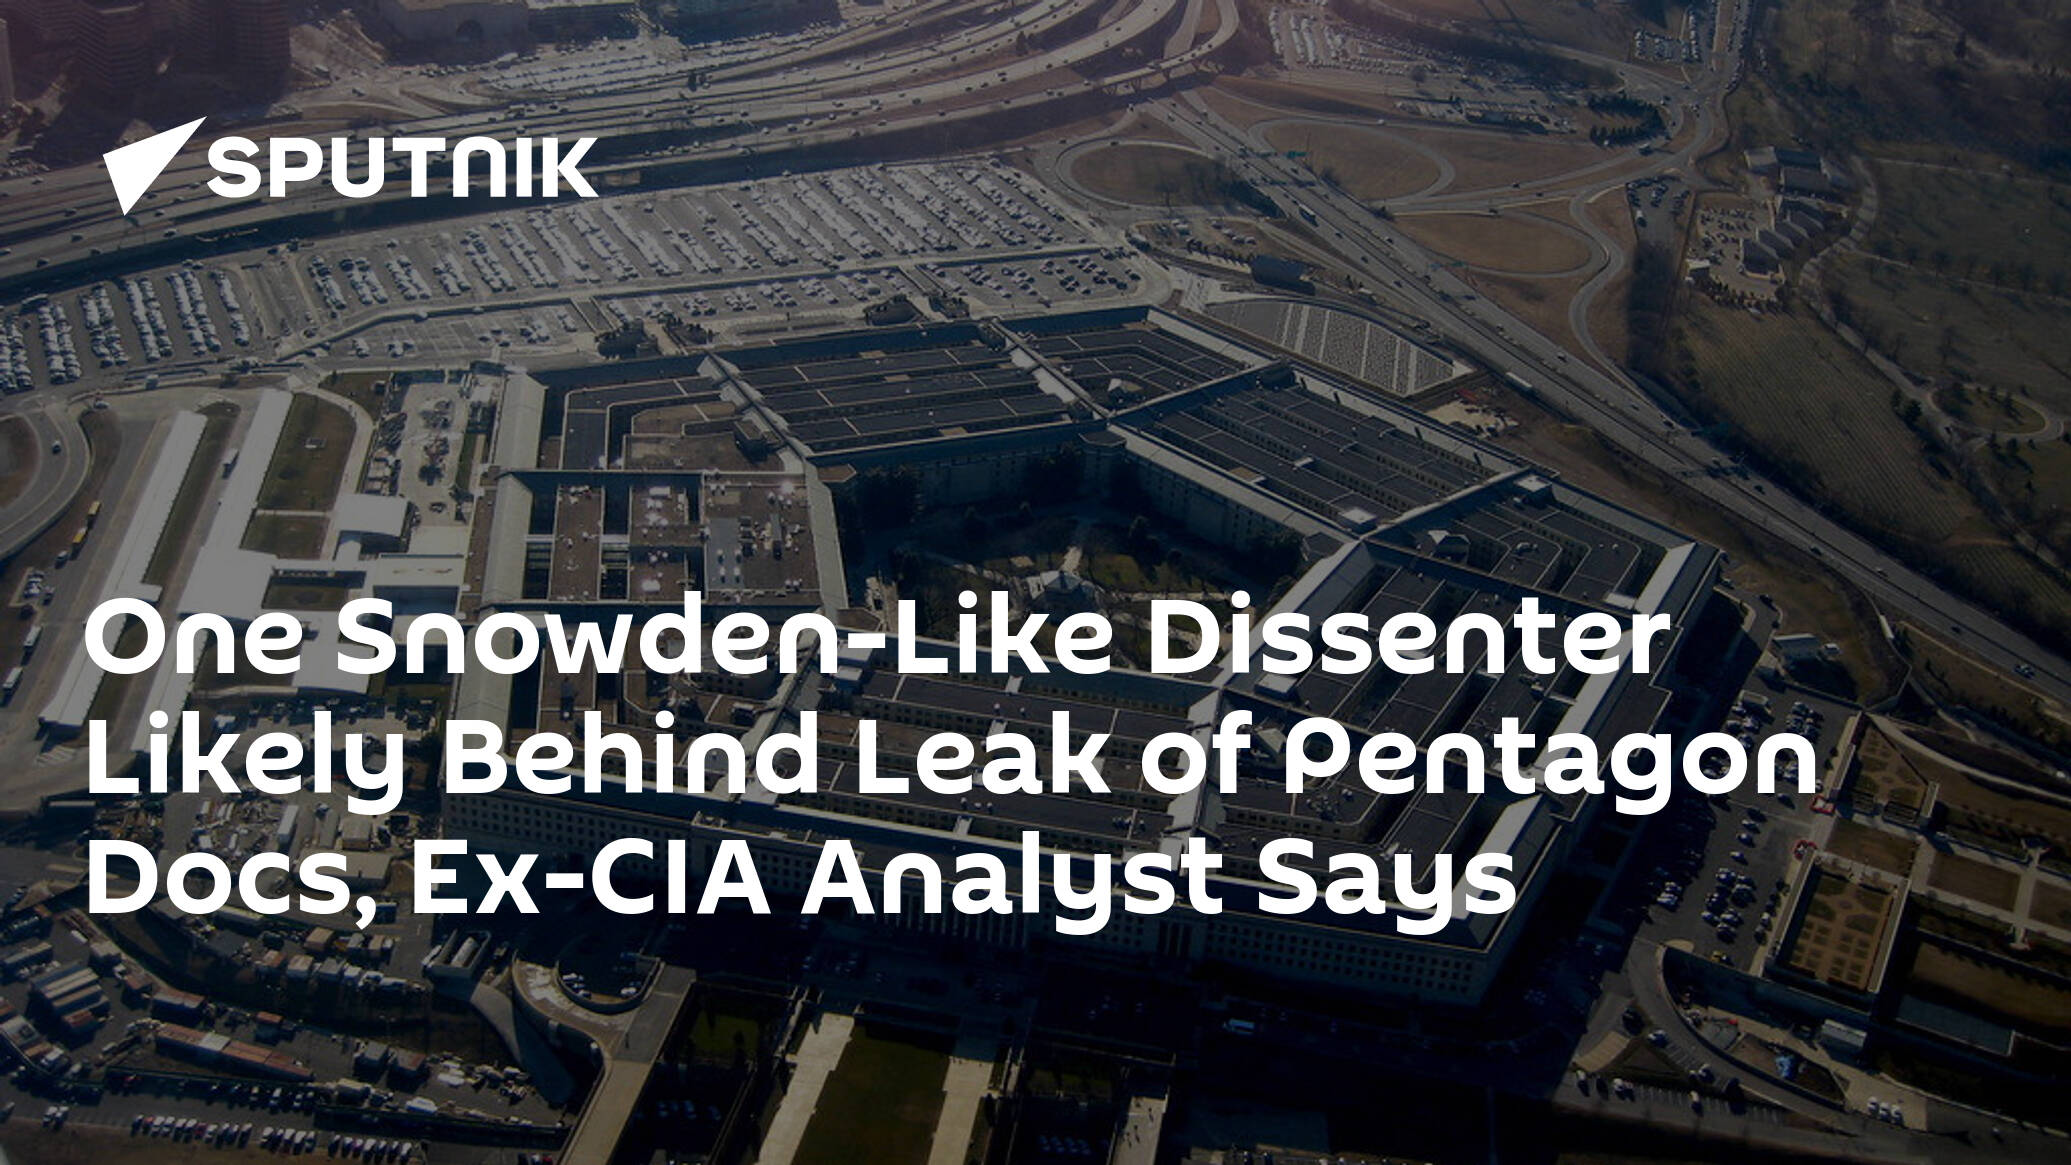 One Snowden-Like Dissenter Likely Behind Leak of Pentagon Docs, Ex-CIA Analyst Says